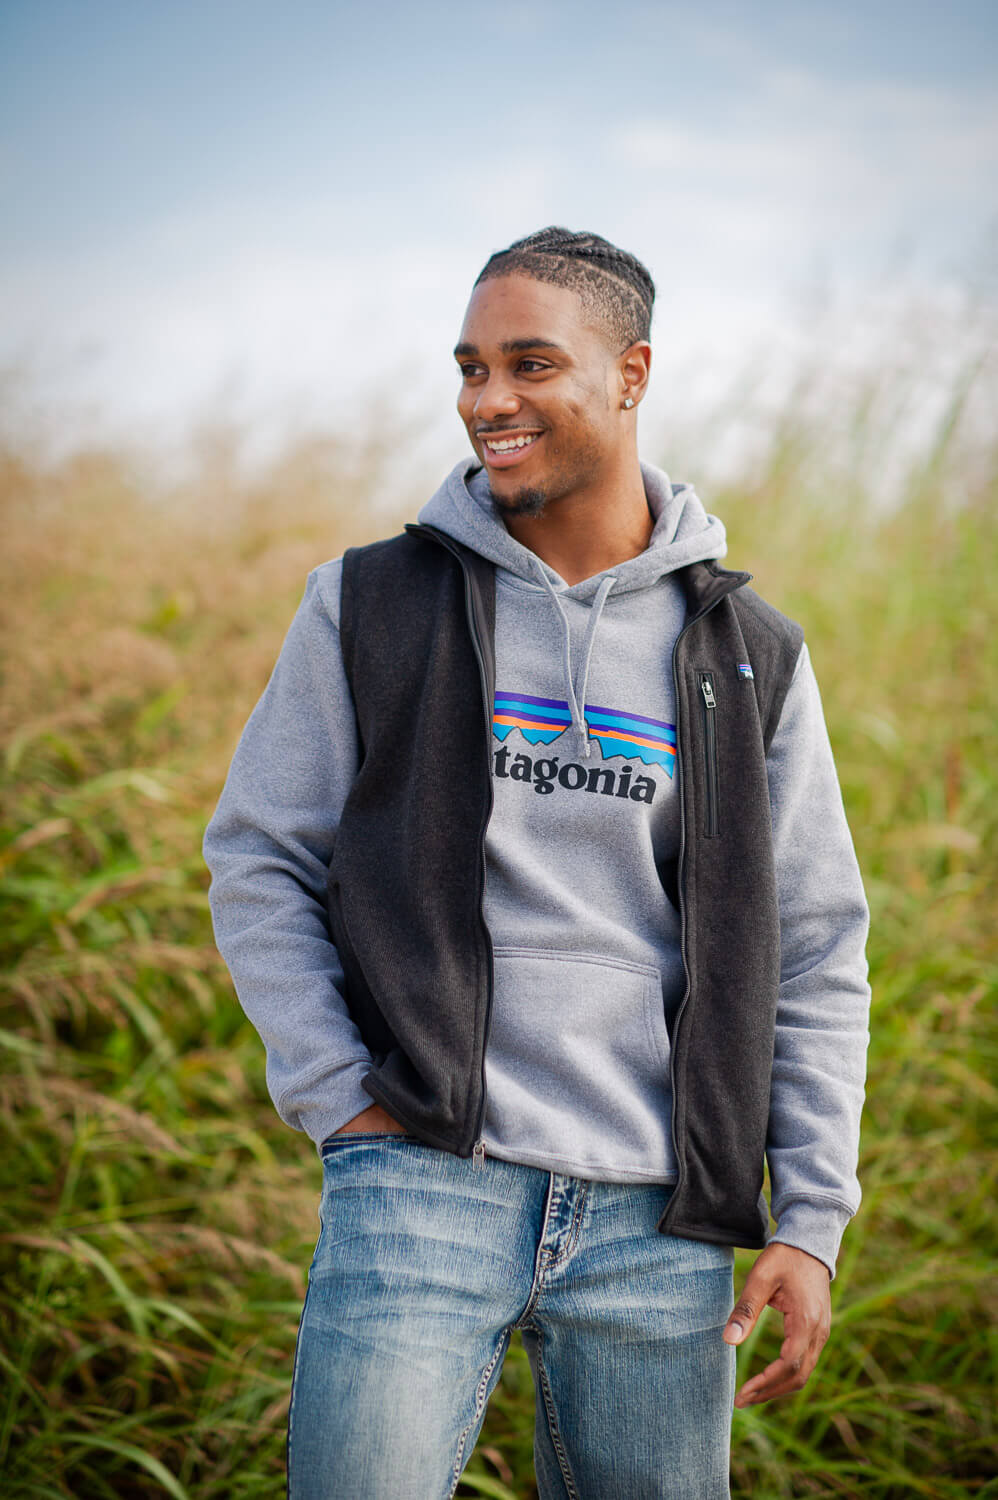 Better Sweater® Fleece Jackets & Vests by Patagonia